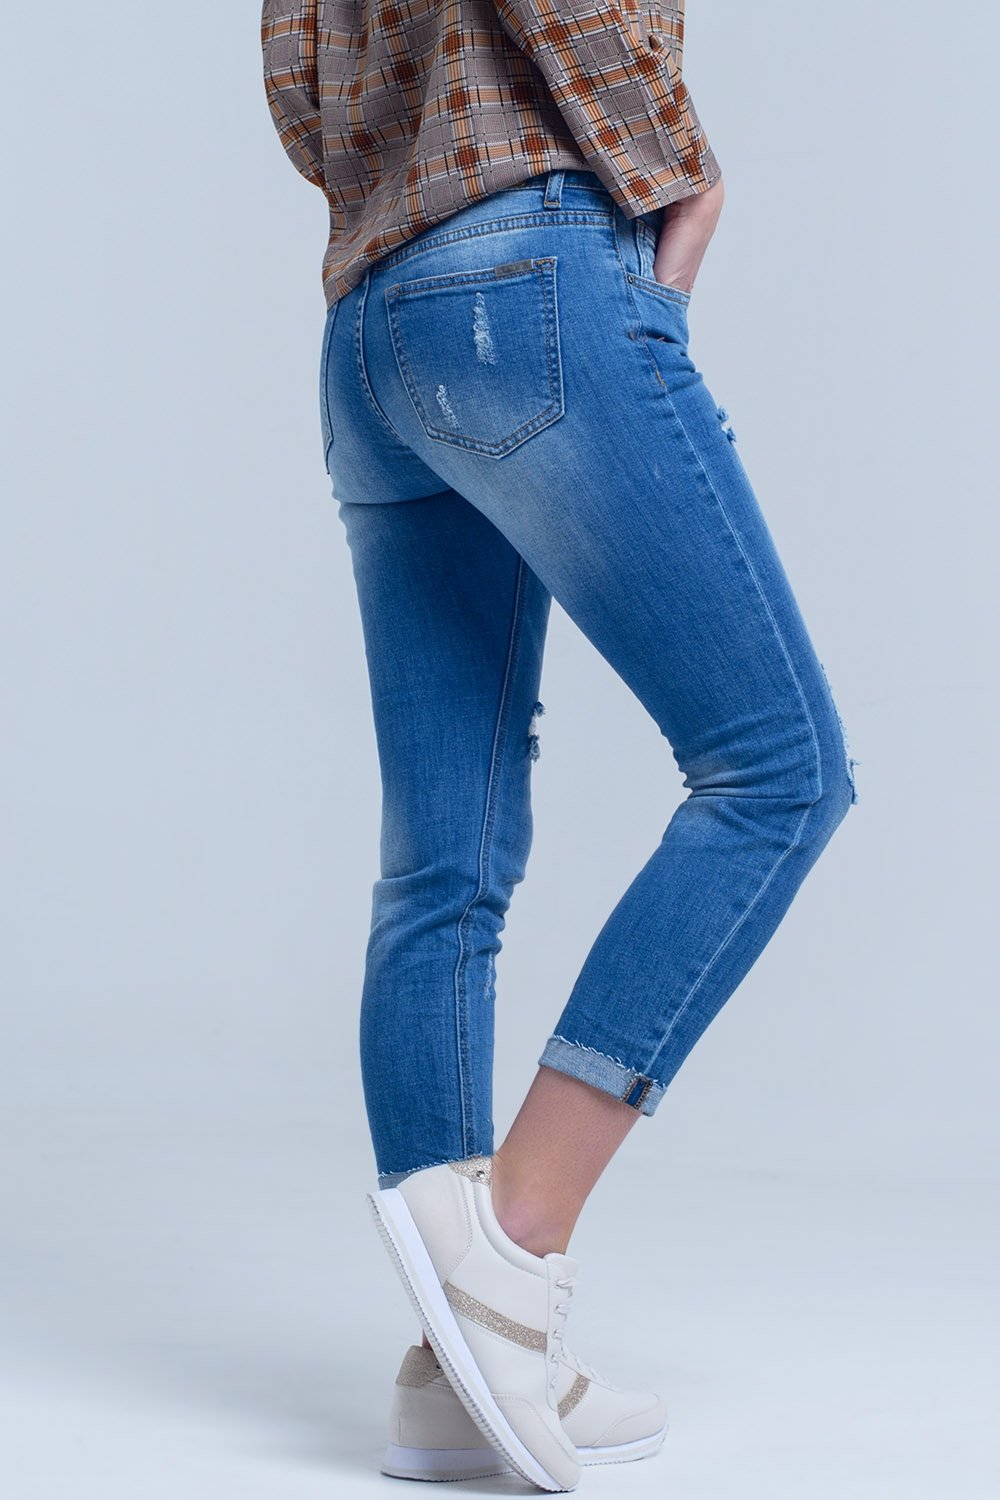 Jean Skinny With Rips on the Legs